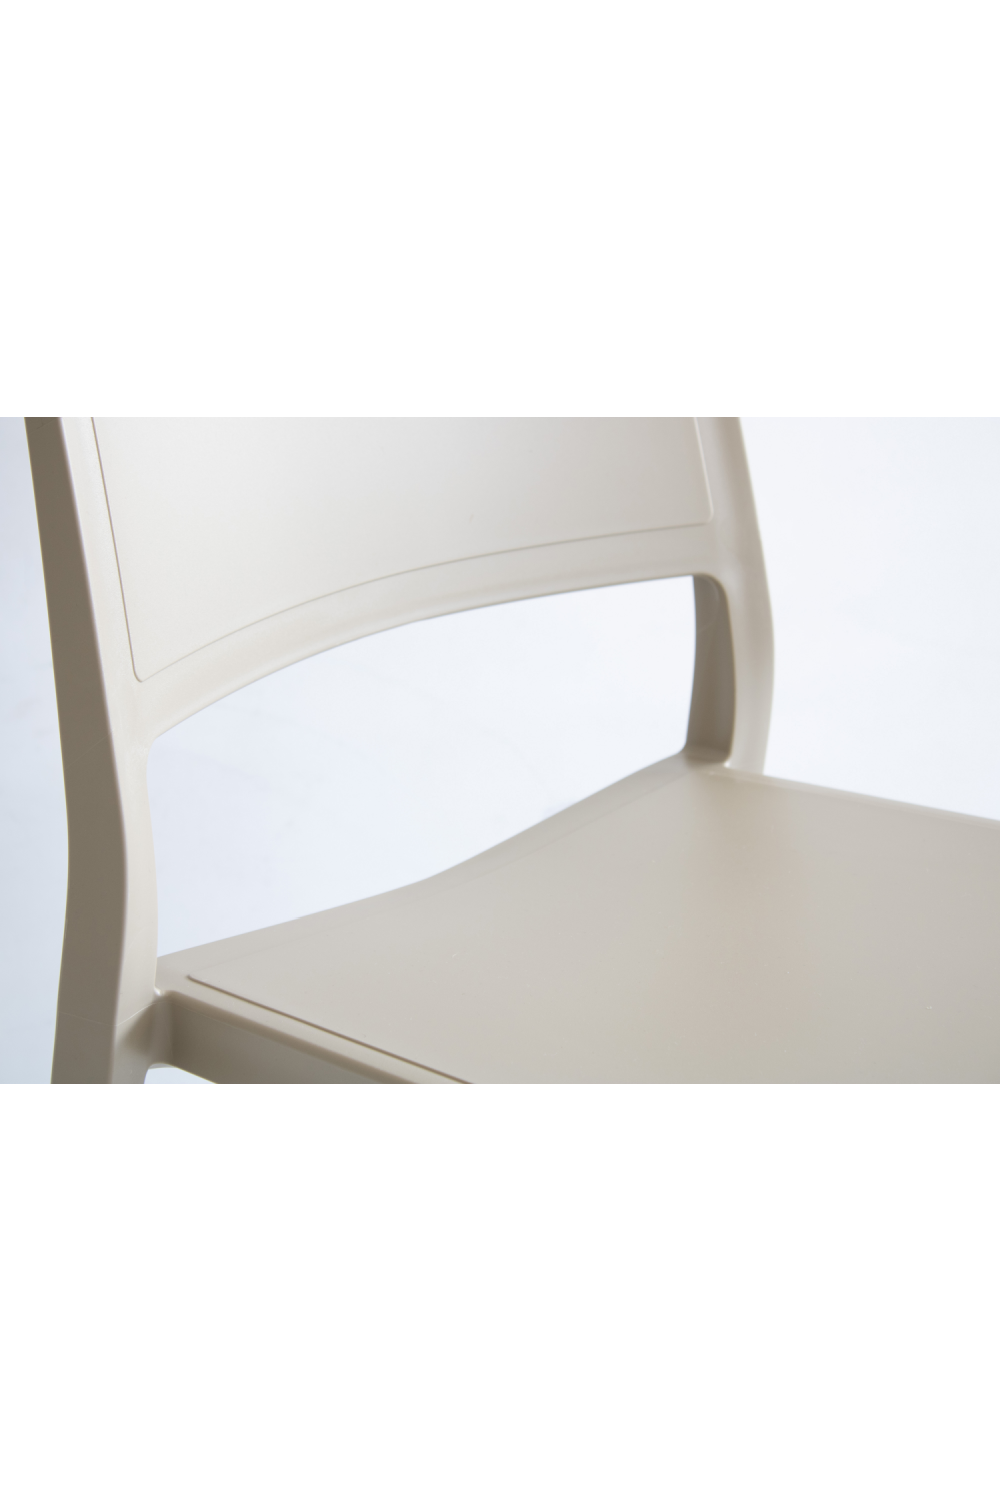 Stackable Outdoor Dining Chair Set (6) | Andrew Martin Kipling | Oroa.com